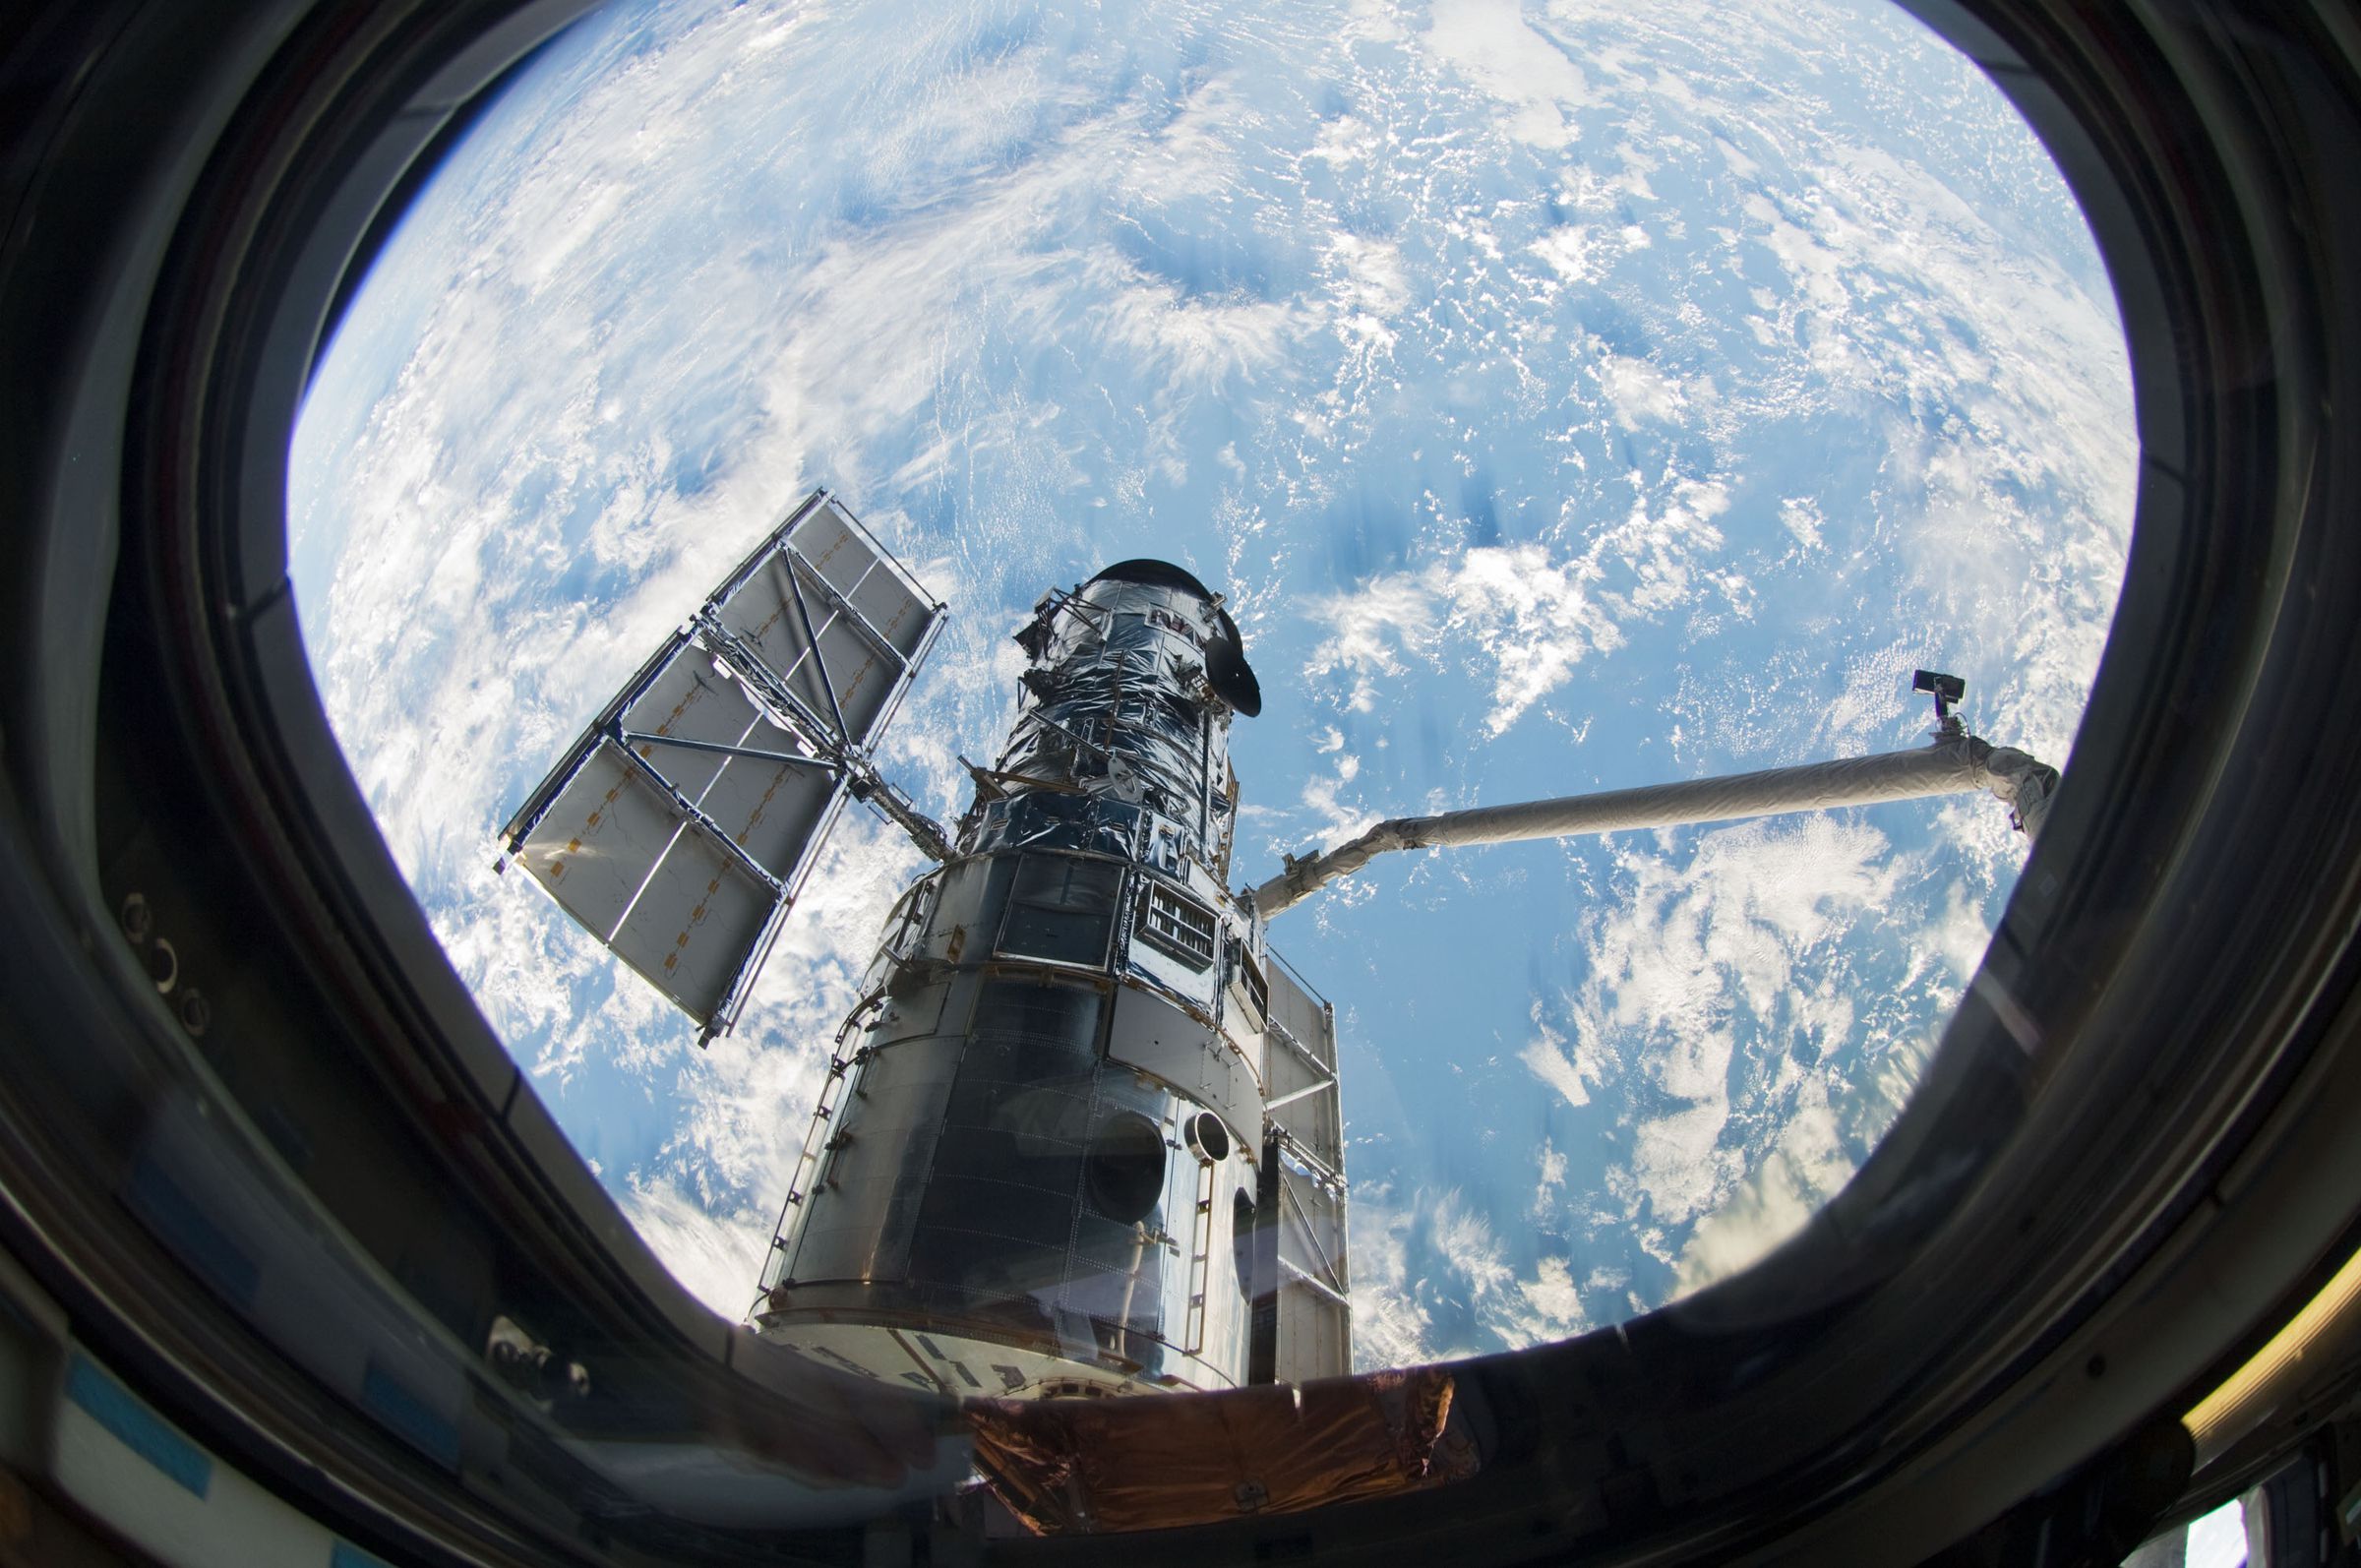 Hubble seen from Space Shuttle Atlantis during the telescope’s last servicing mission in 2009